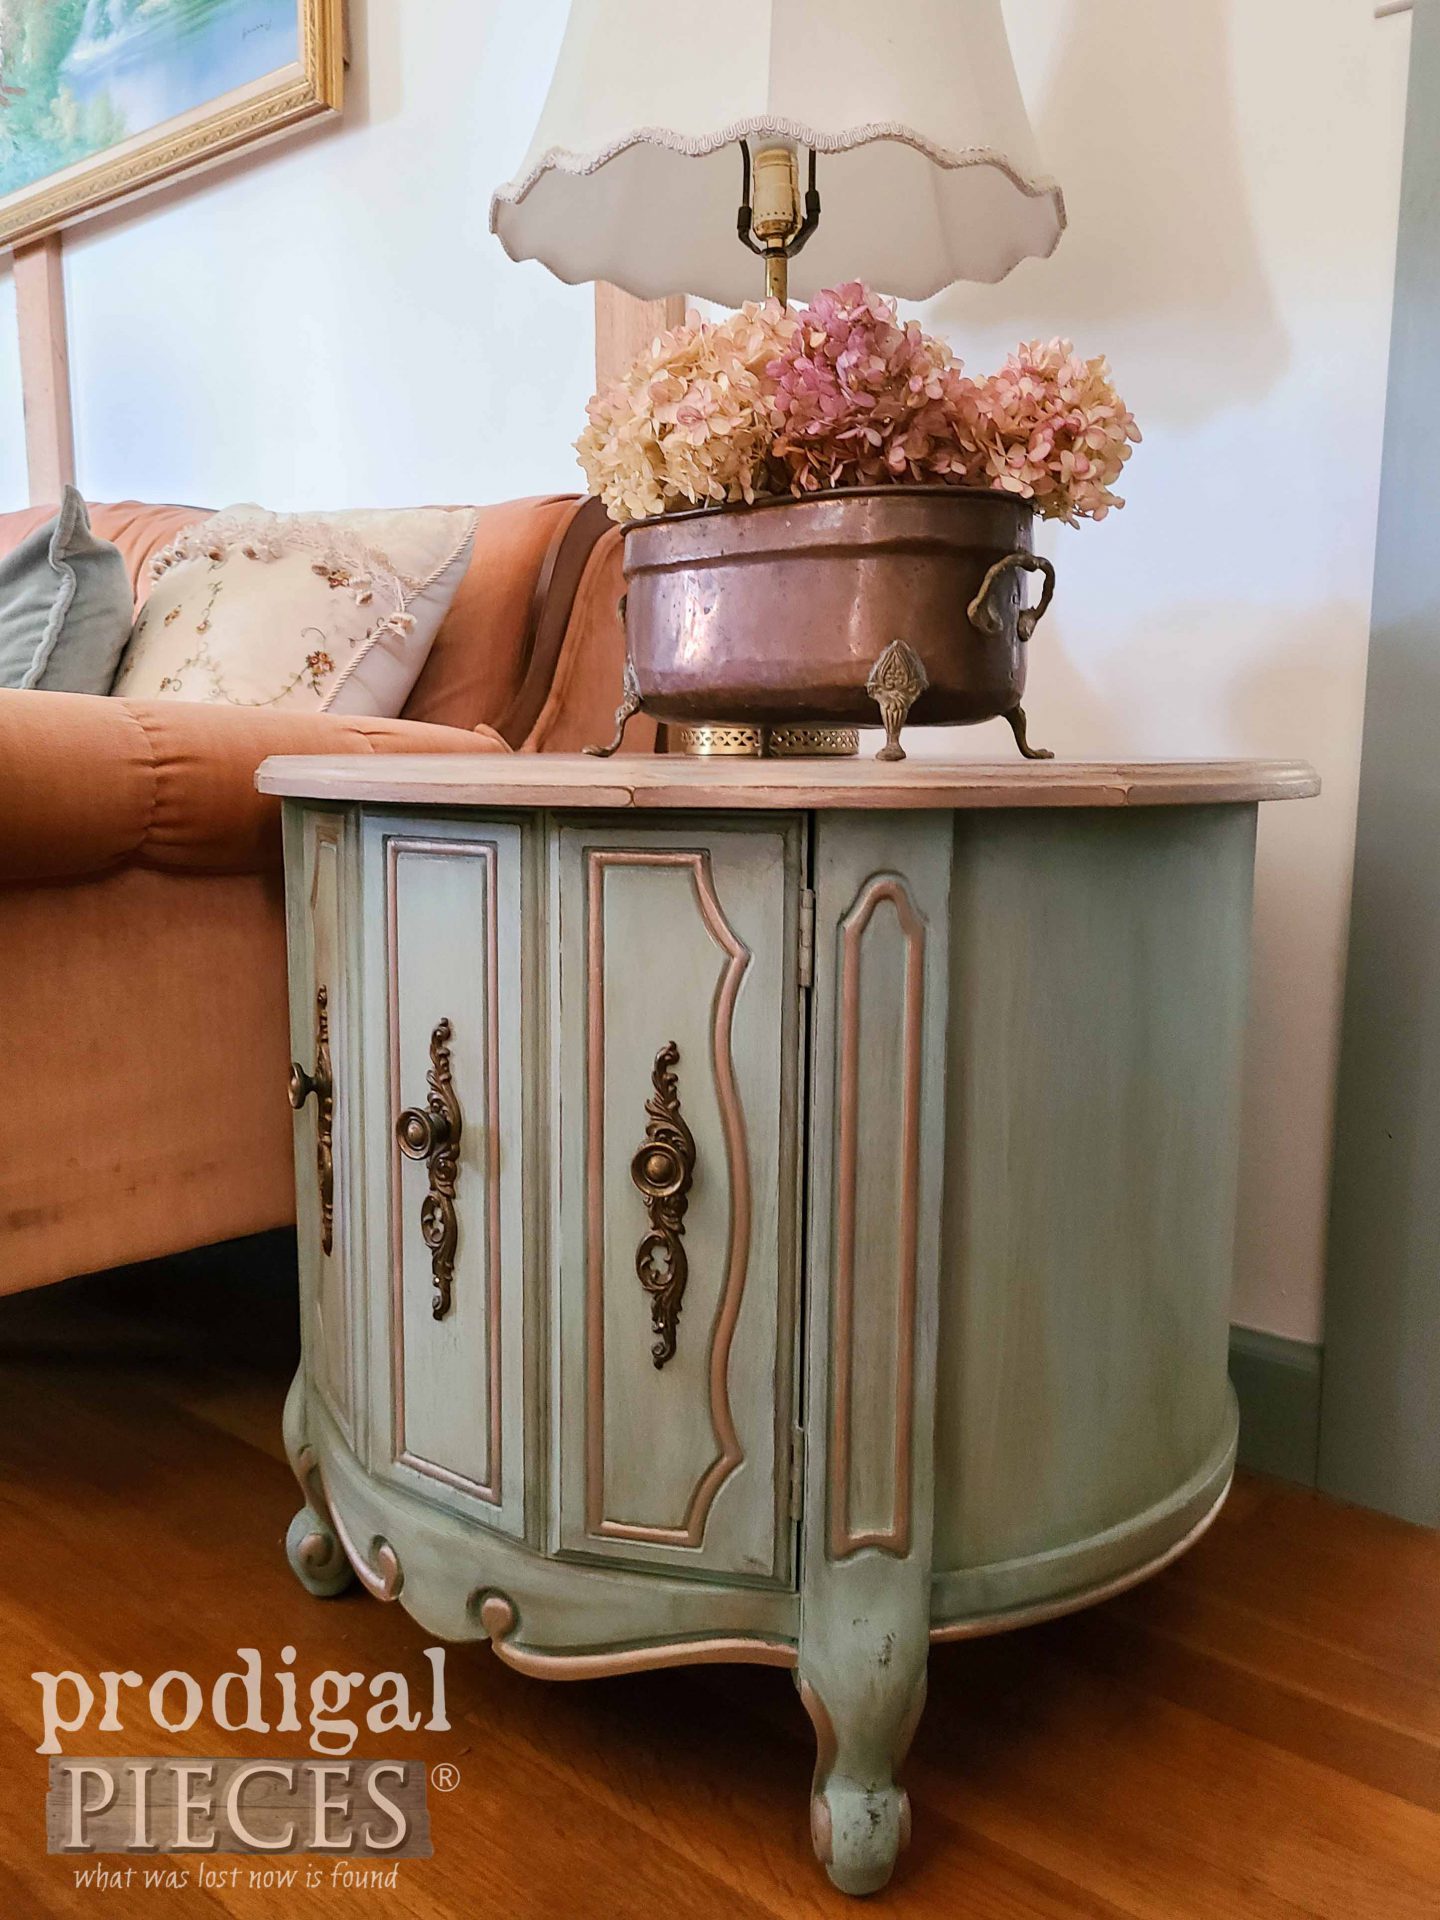 Vintage Mersman Side Table in French Provincial Blue by Larissa of Prodigal Pieces | prodigalpieces.com #prodigalpieces #homedecor #furniture #vintage